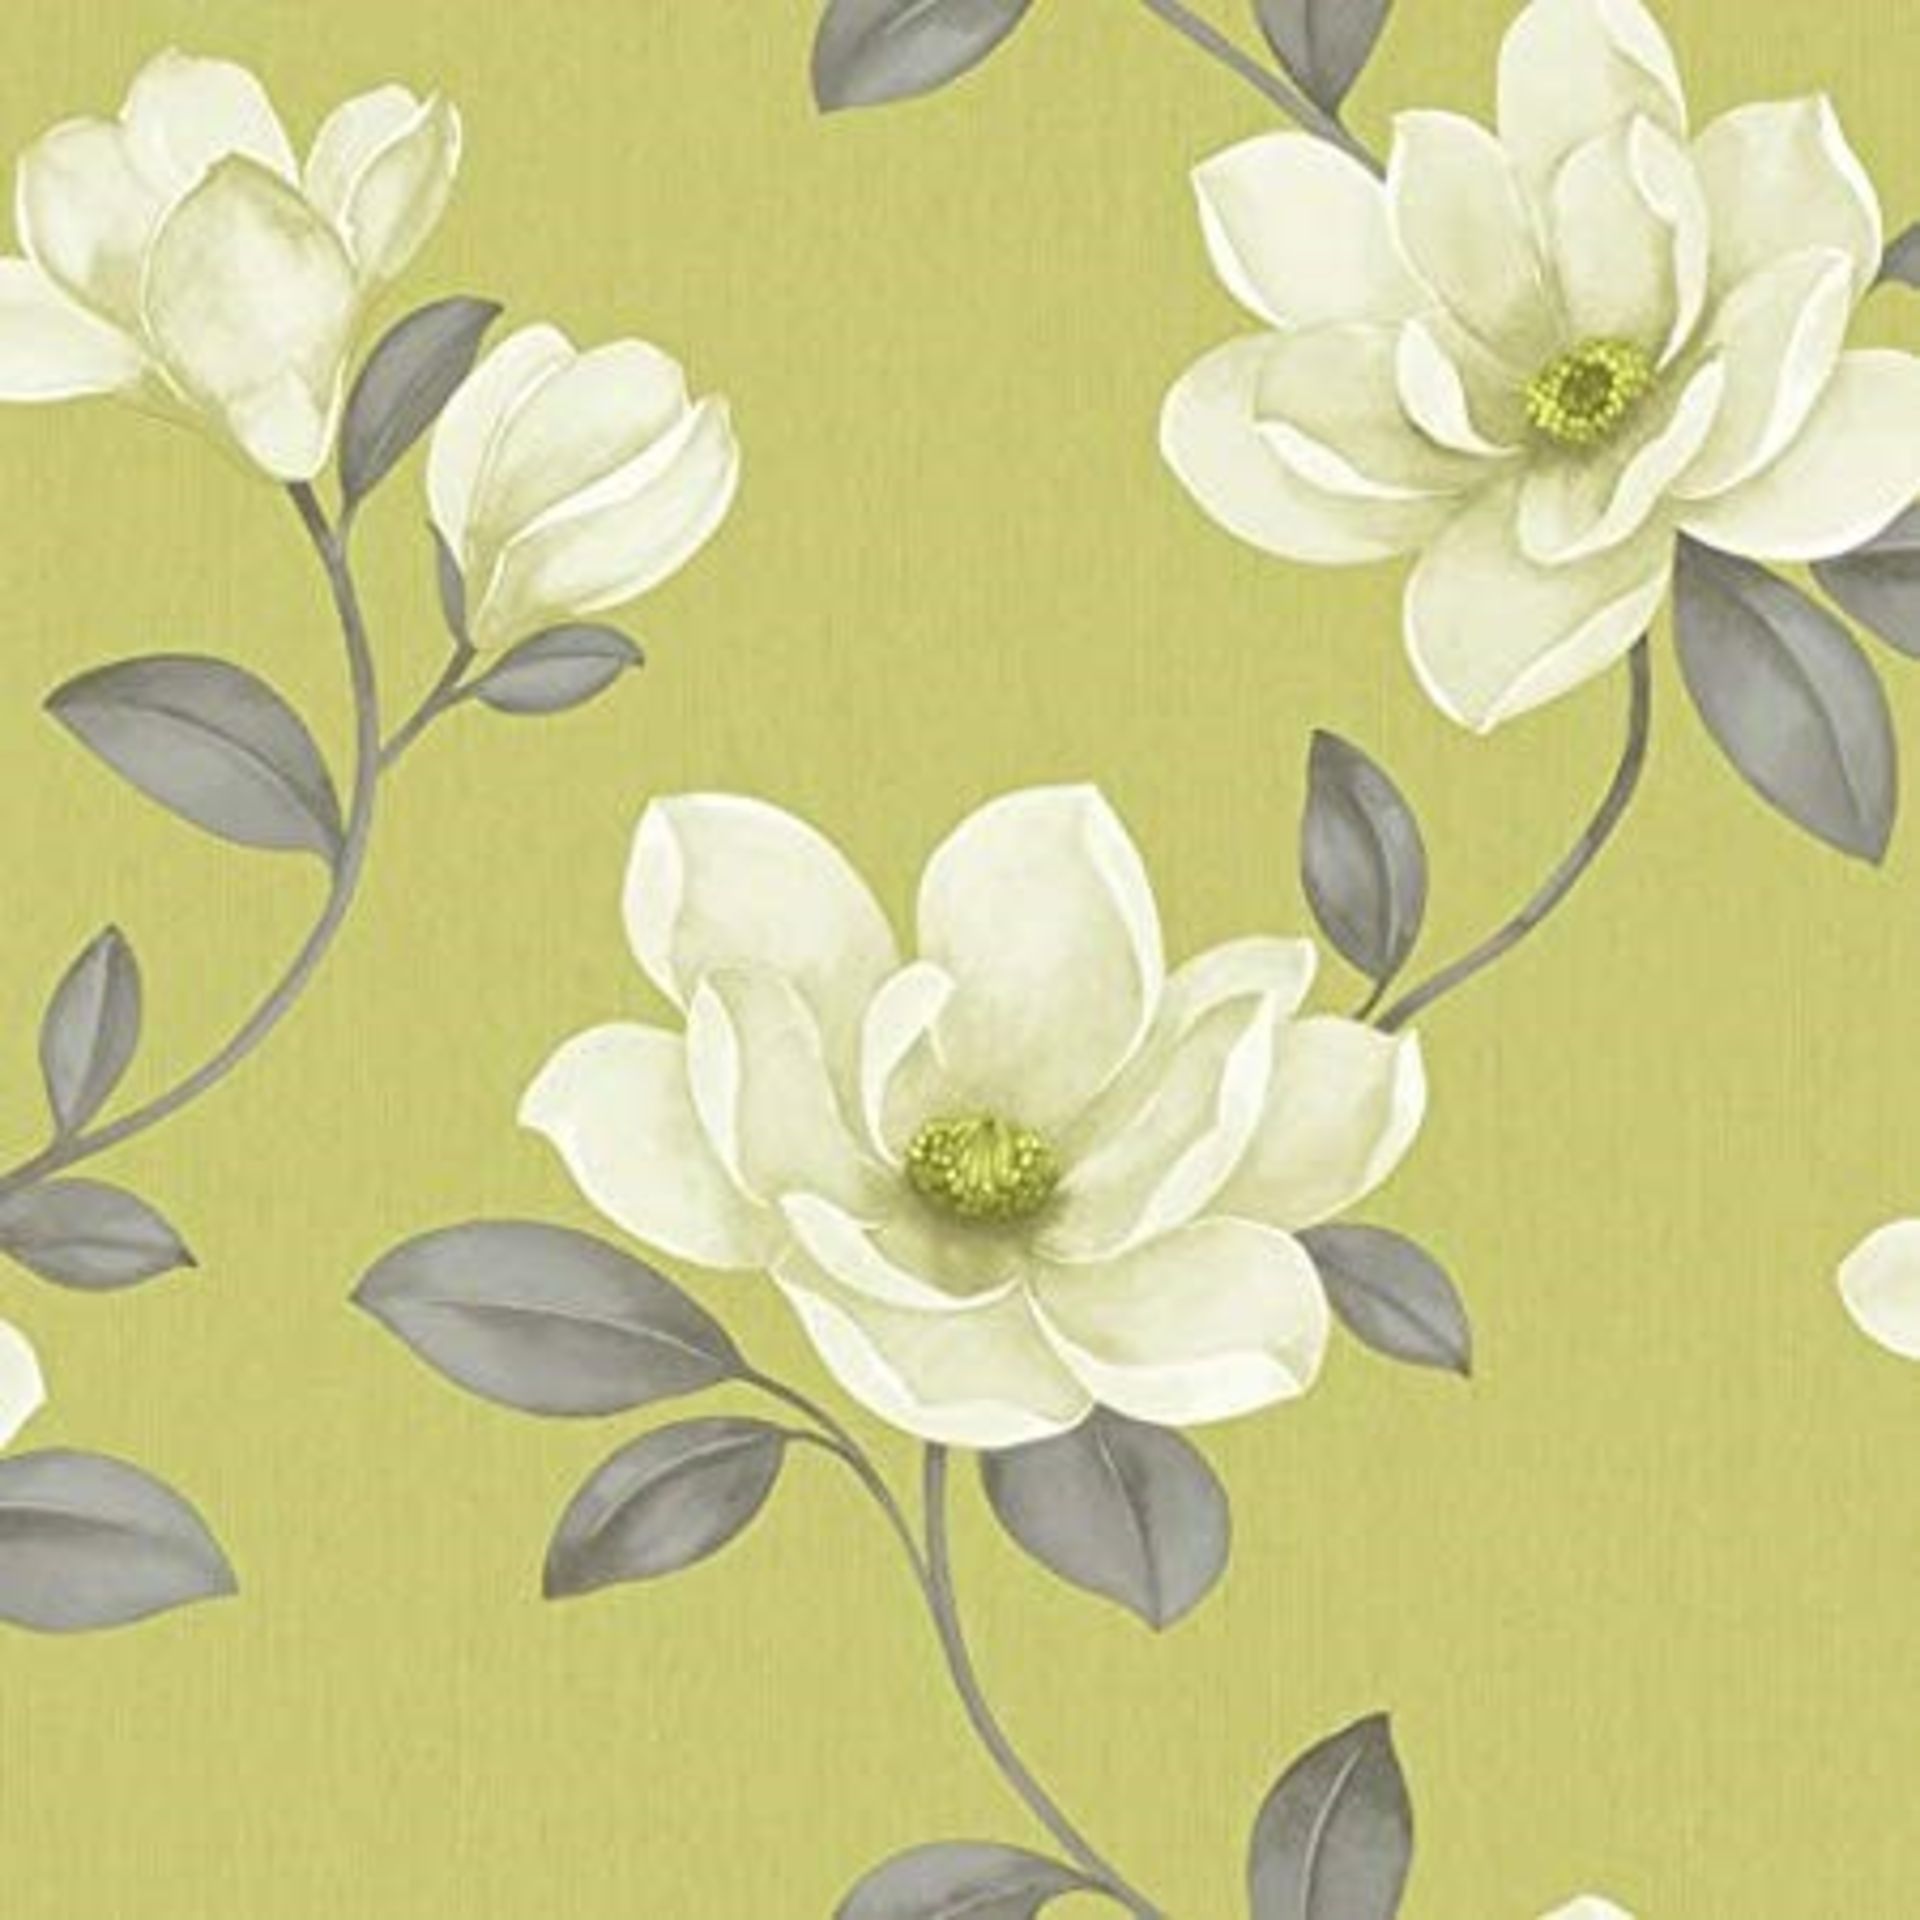 1 BRAND NEW BOX OF 6 ROLLS OF ARTHOUSE MAGNOLIA GREEN WALLPAPER 612402 (VIEWING HIGHLY RECOMMENDED)